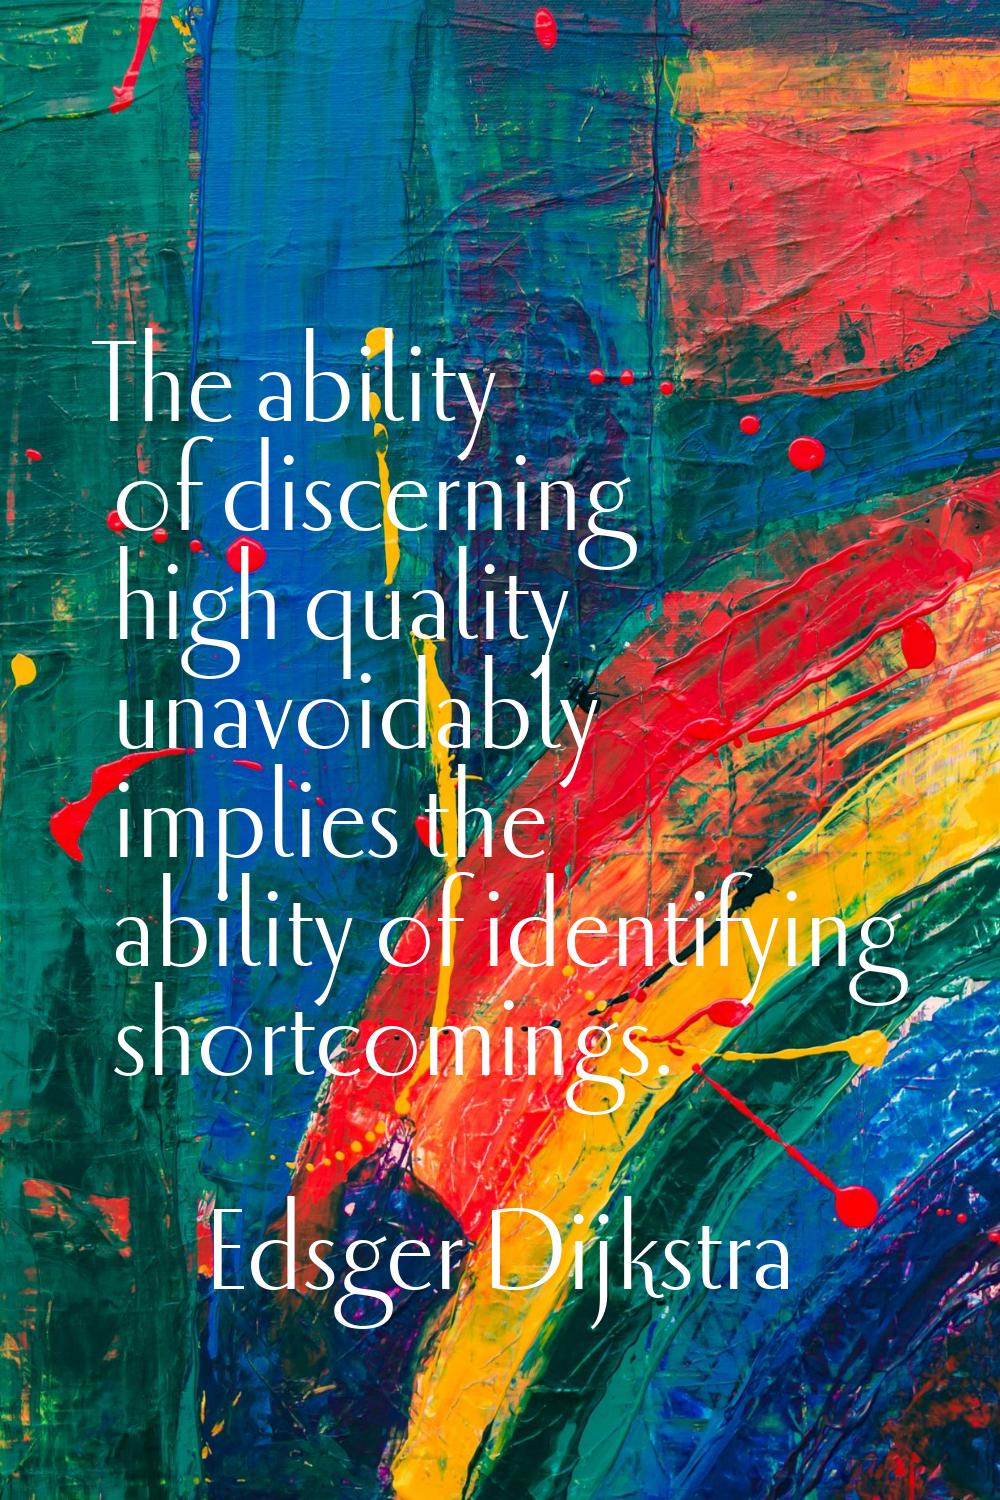 The ability of discerning high quality unavoidably implies the ability of identifying shortcomings.